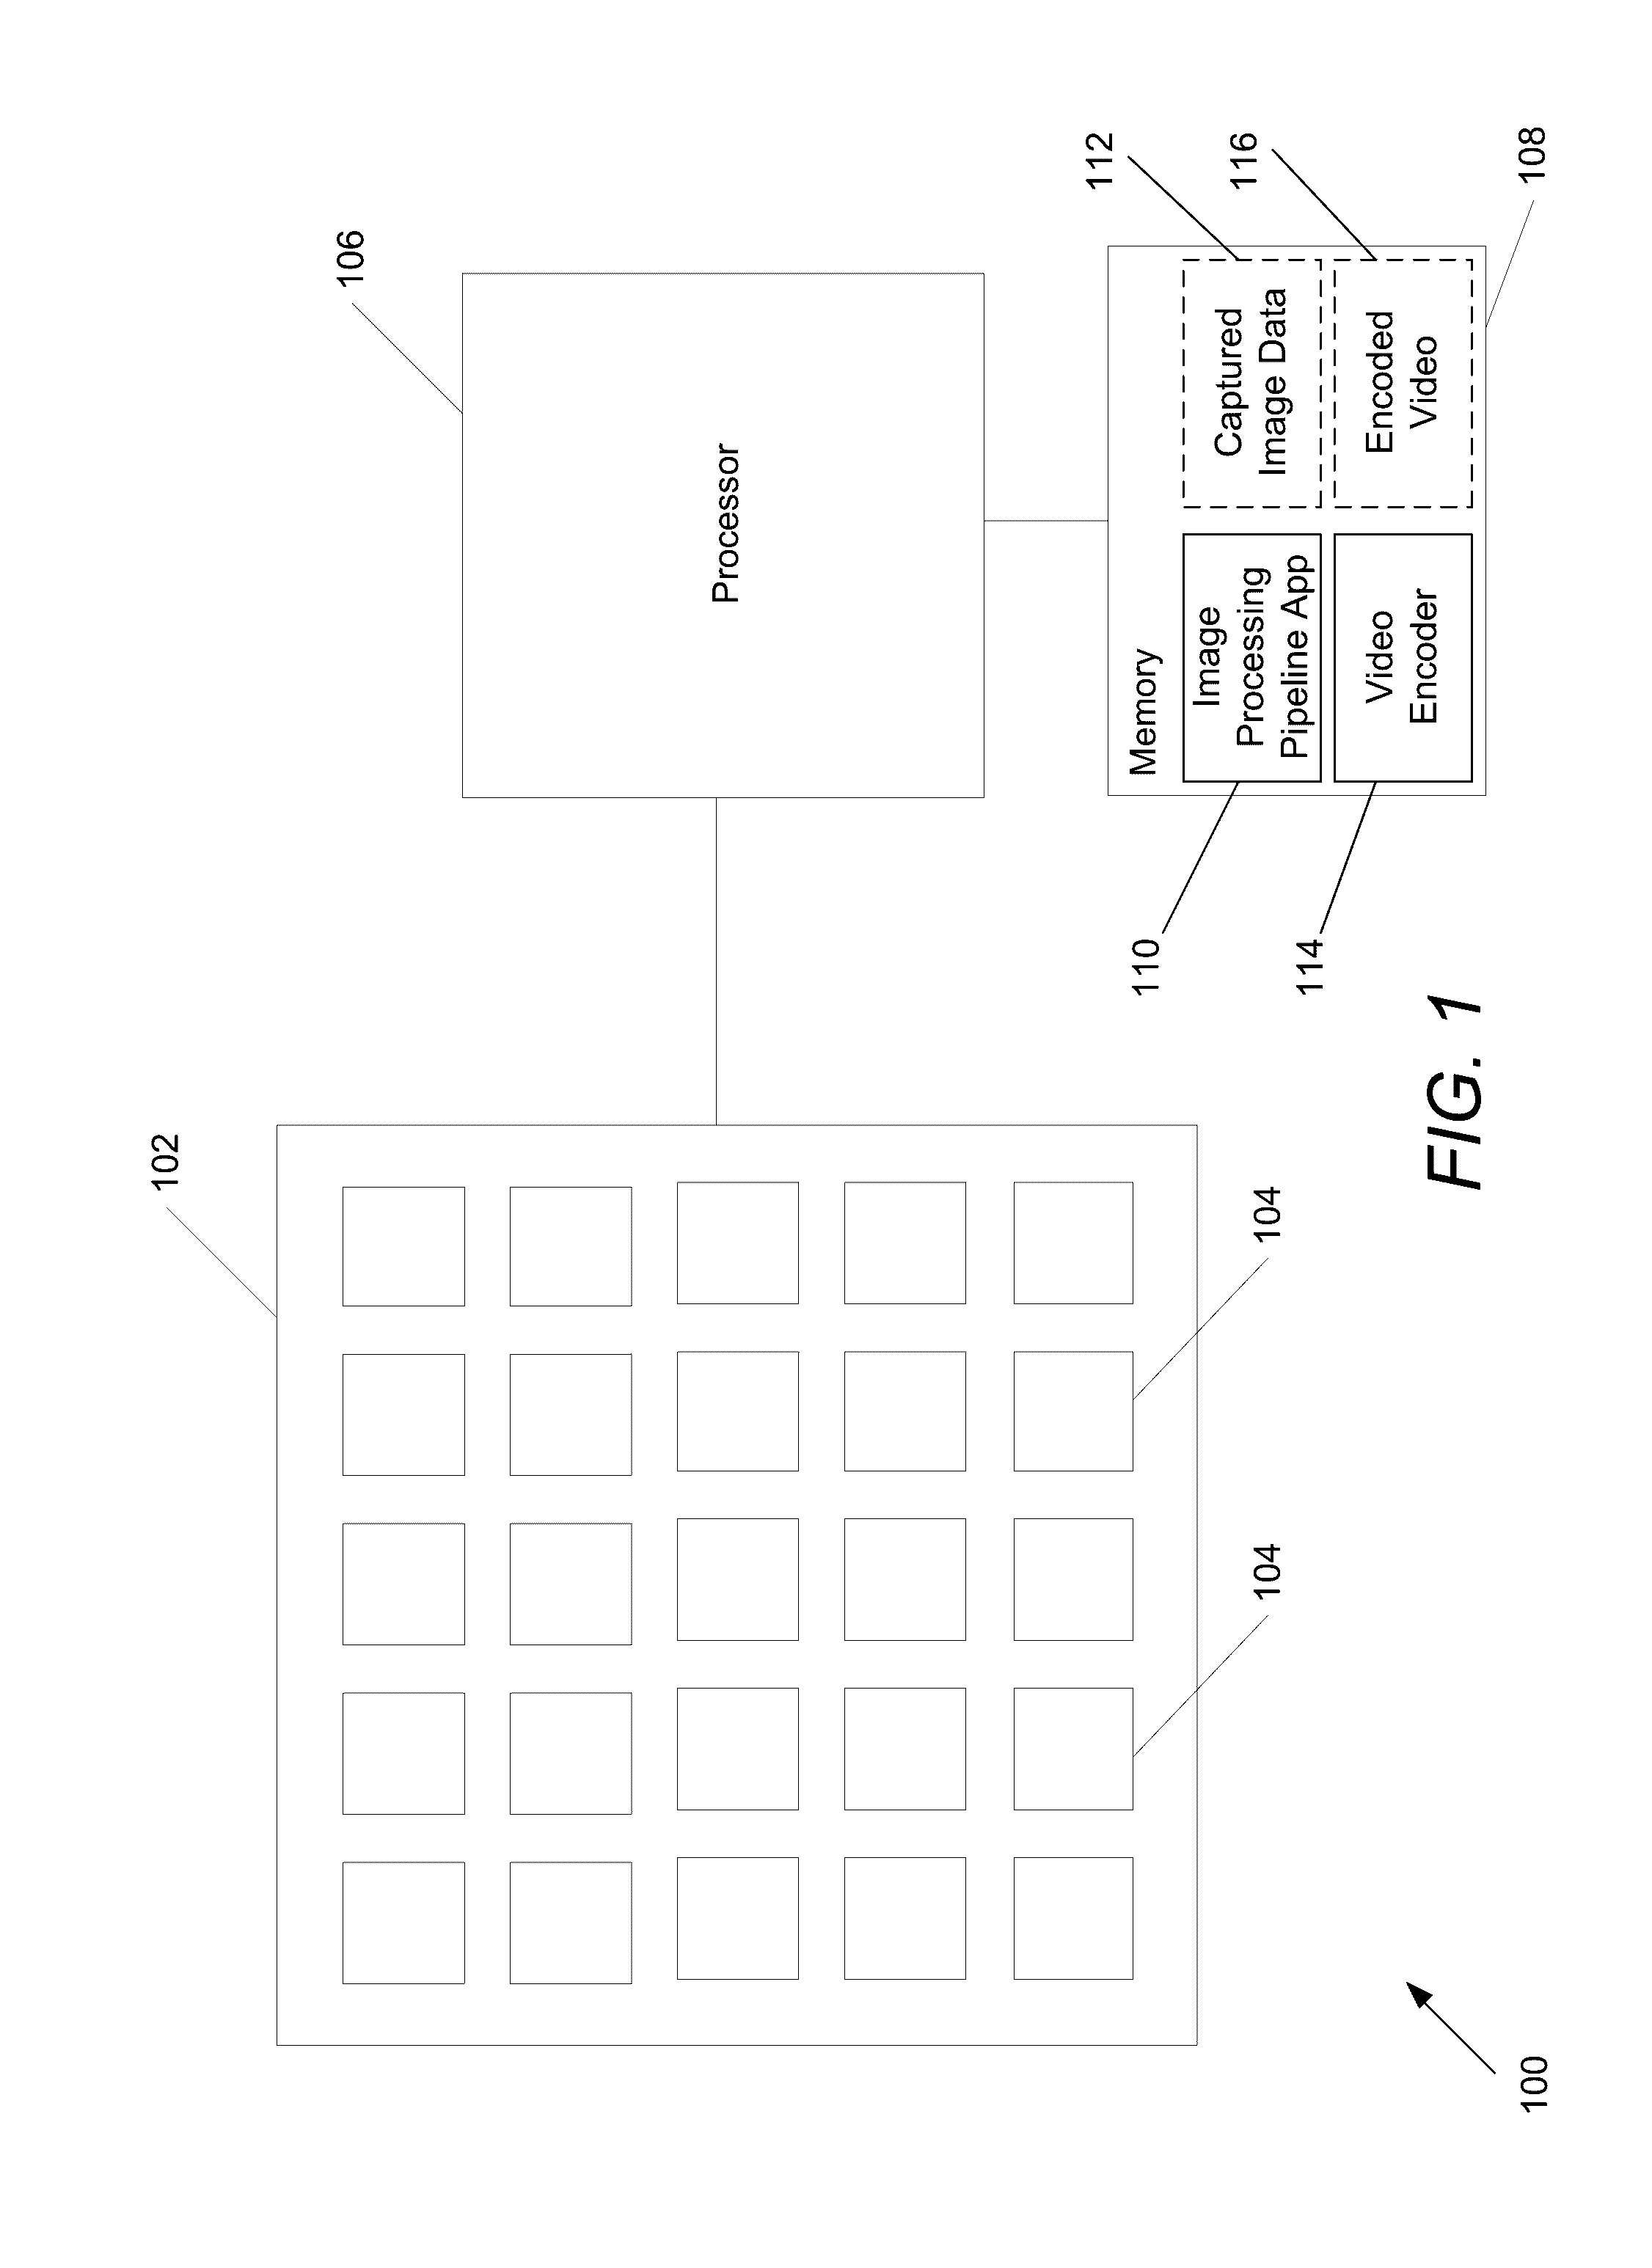 Systems and Methods for Performing High Speed Video Capture and Depth Estimation Using Array Cameras